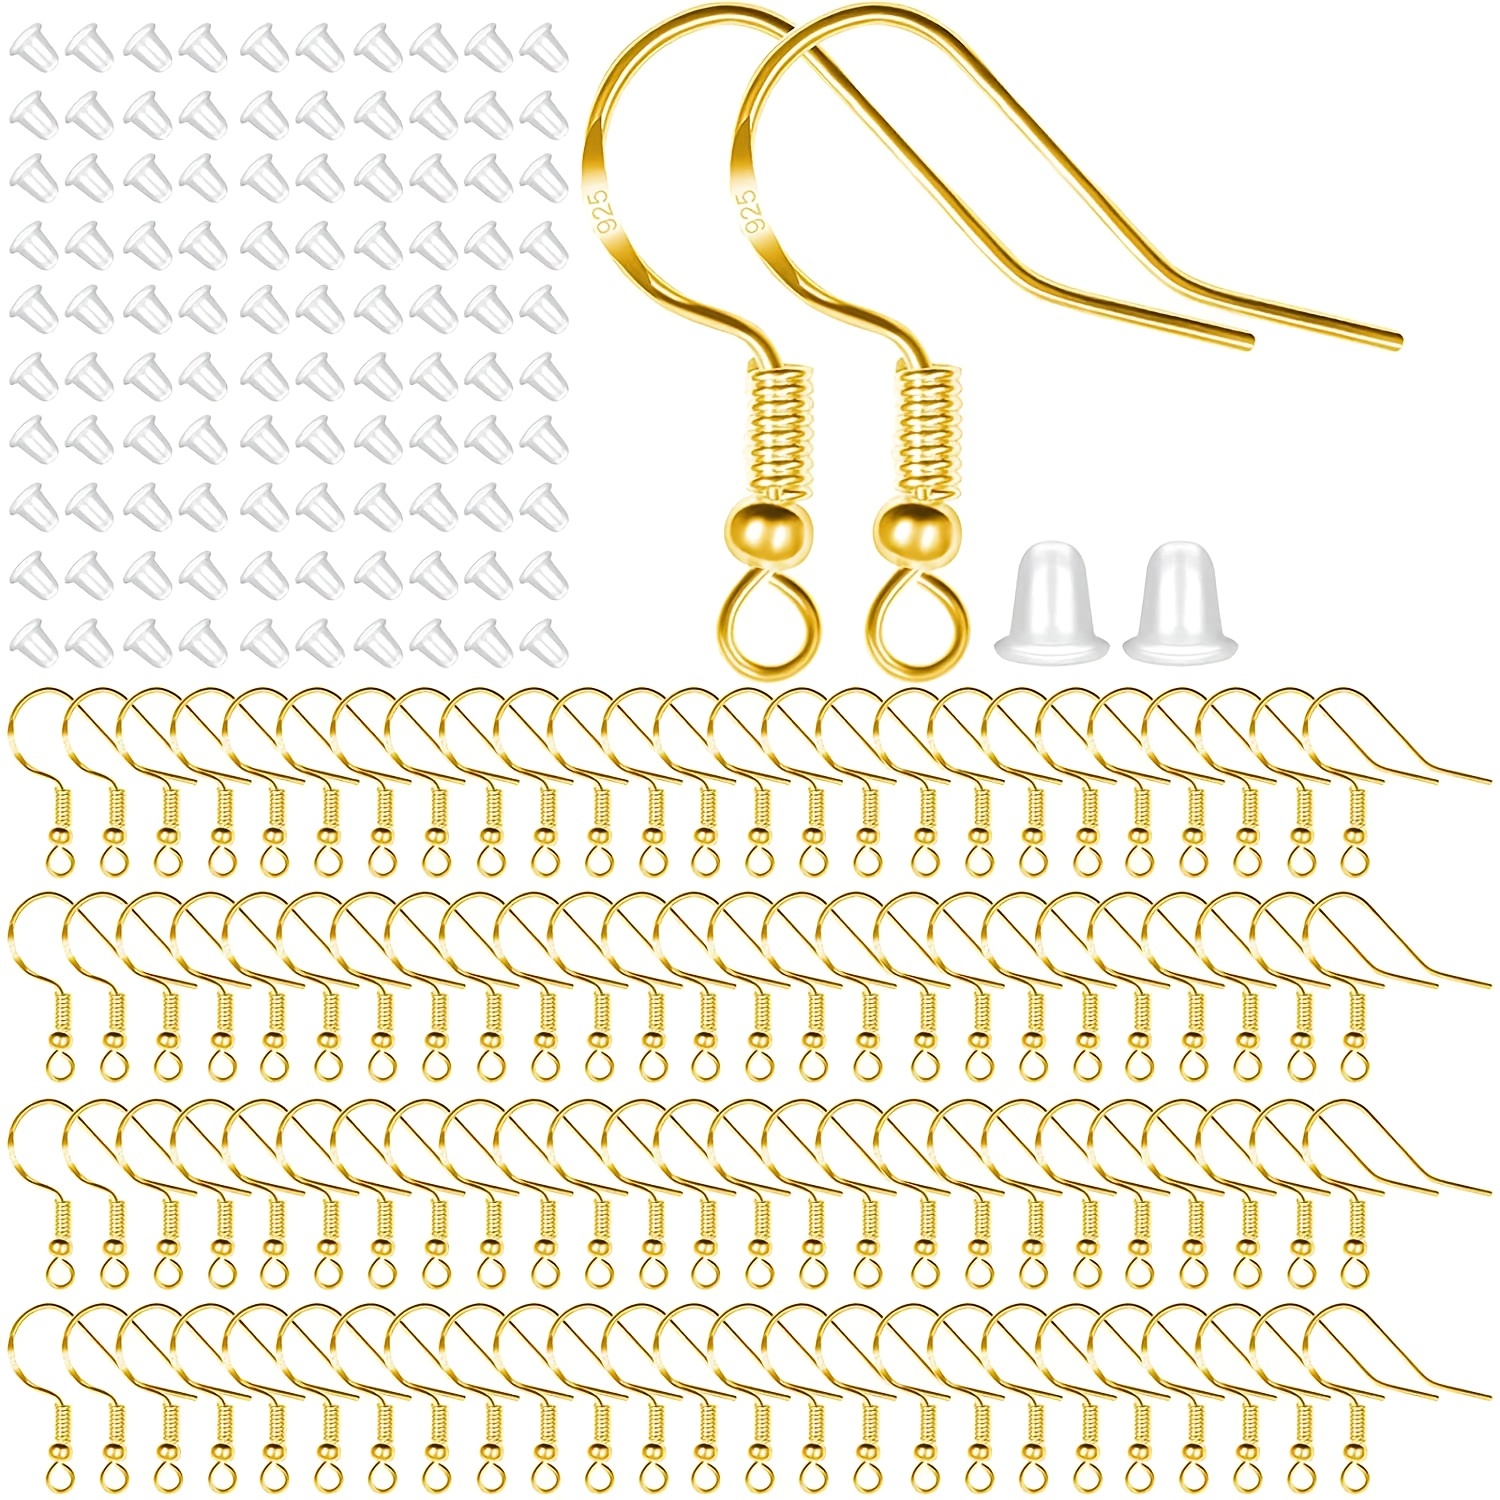 100 PCS/50 Pairs Earring Hooks, 925 Sterling Silver Hypoallergenic